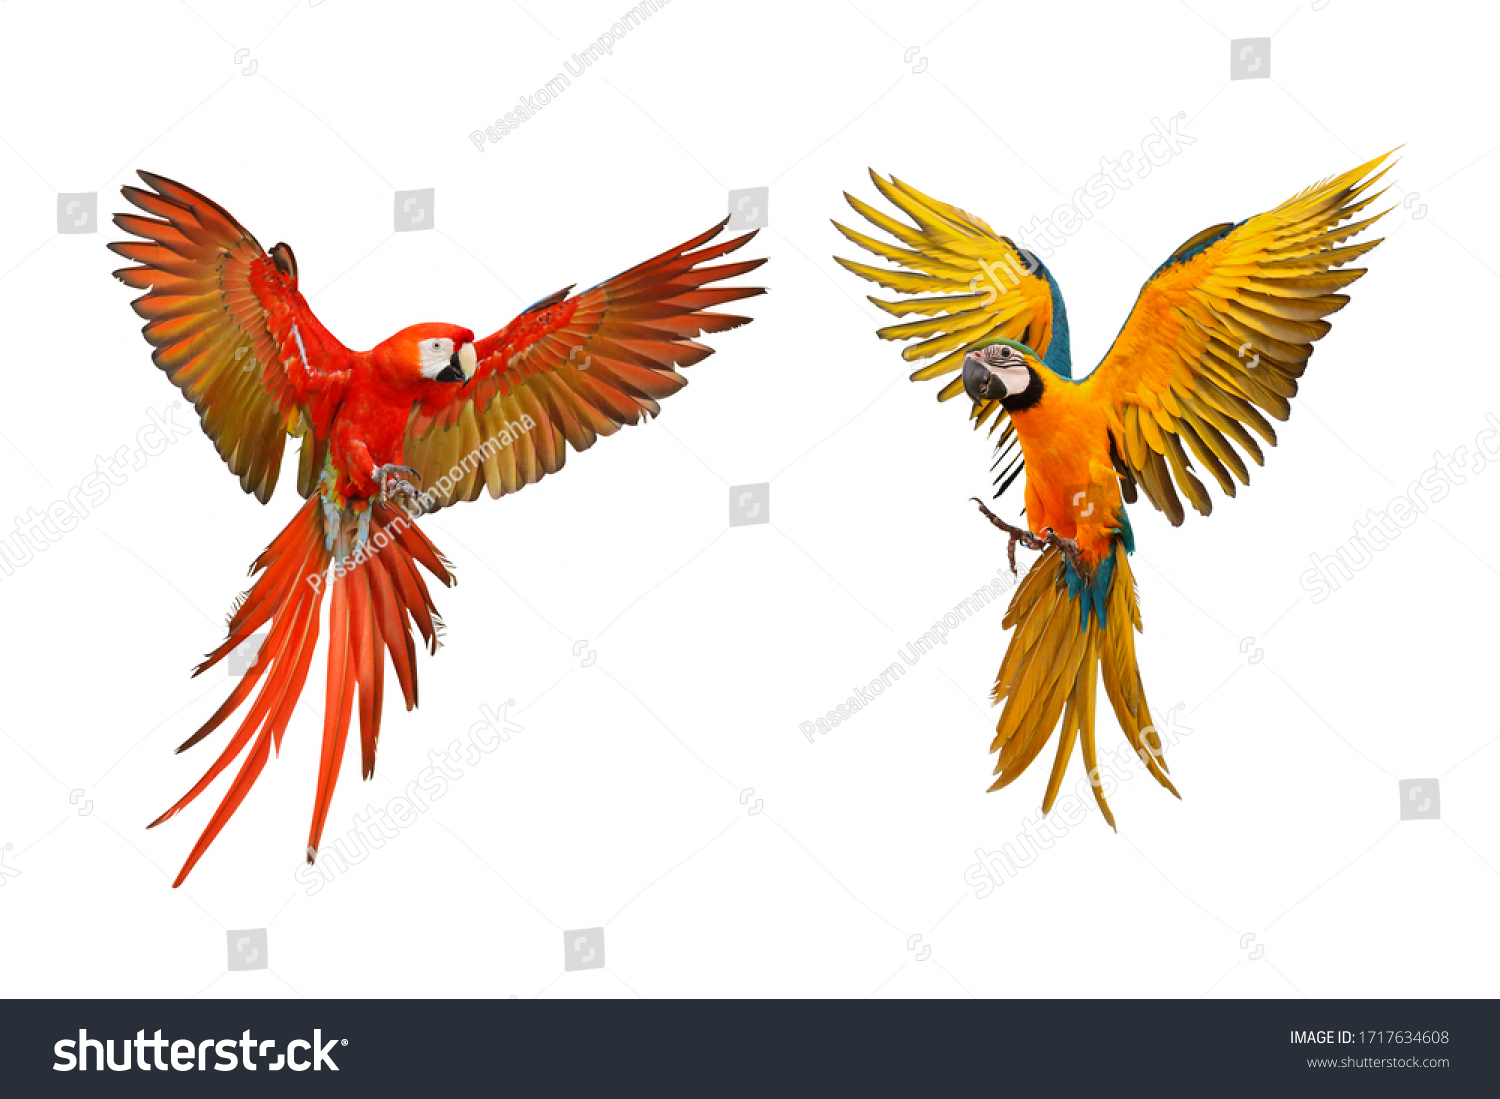 Colorful macaw parrots isolated on white, Scarlet macaw and Blue and gold macaw #1717634608